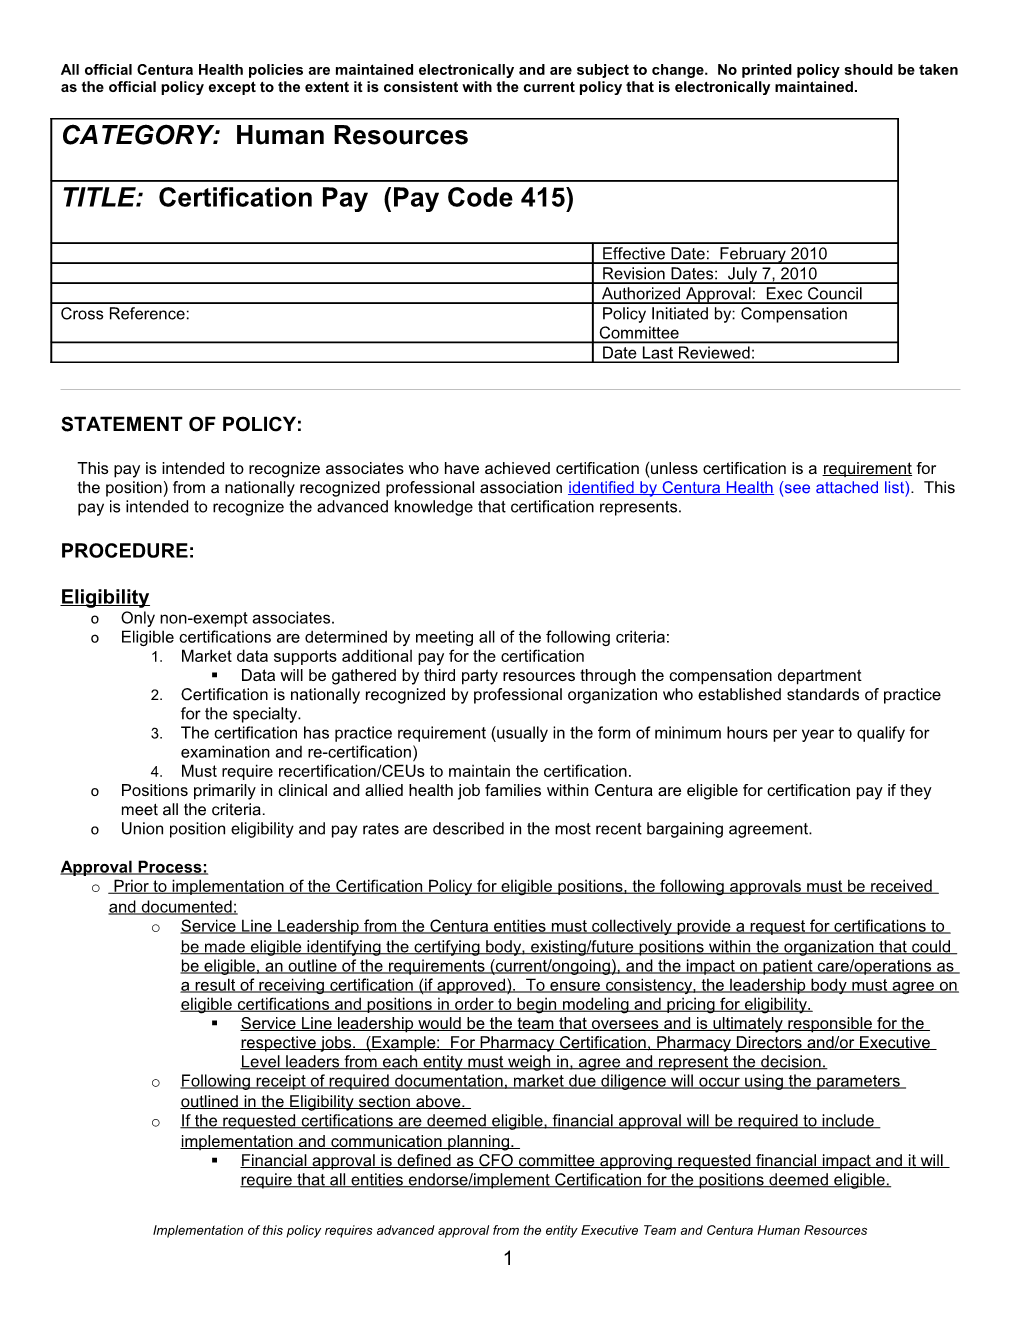 REQUEST for NEW Or MODIFIED PAY POLICY